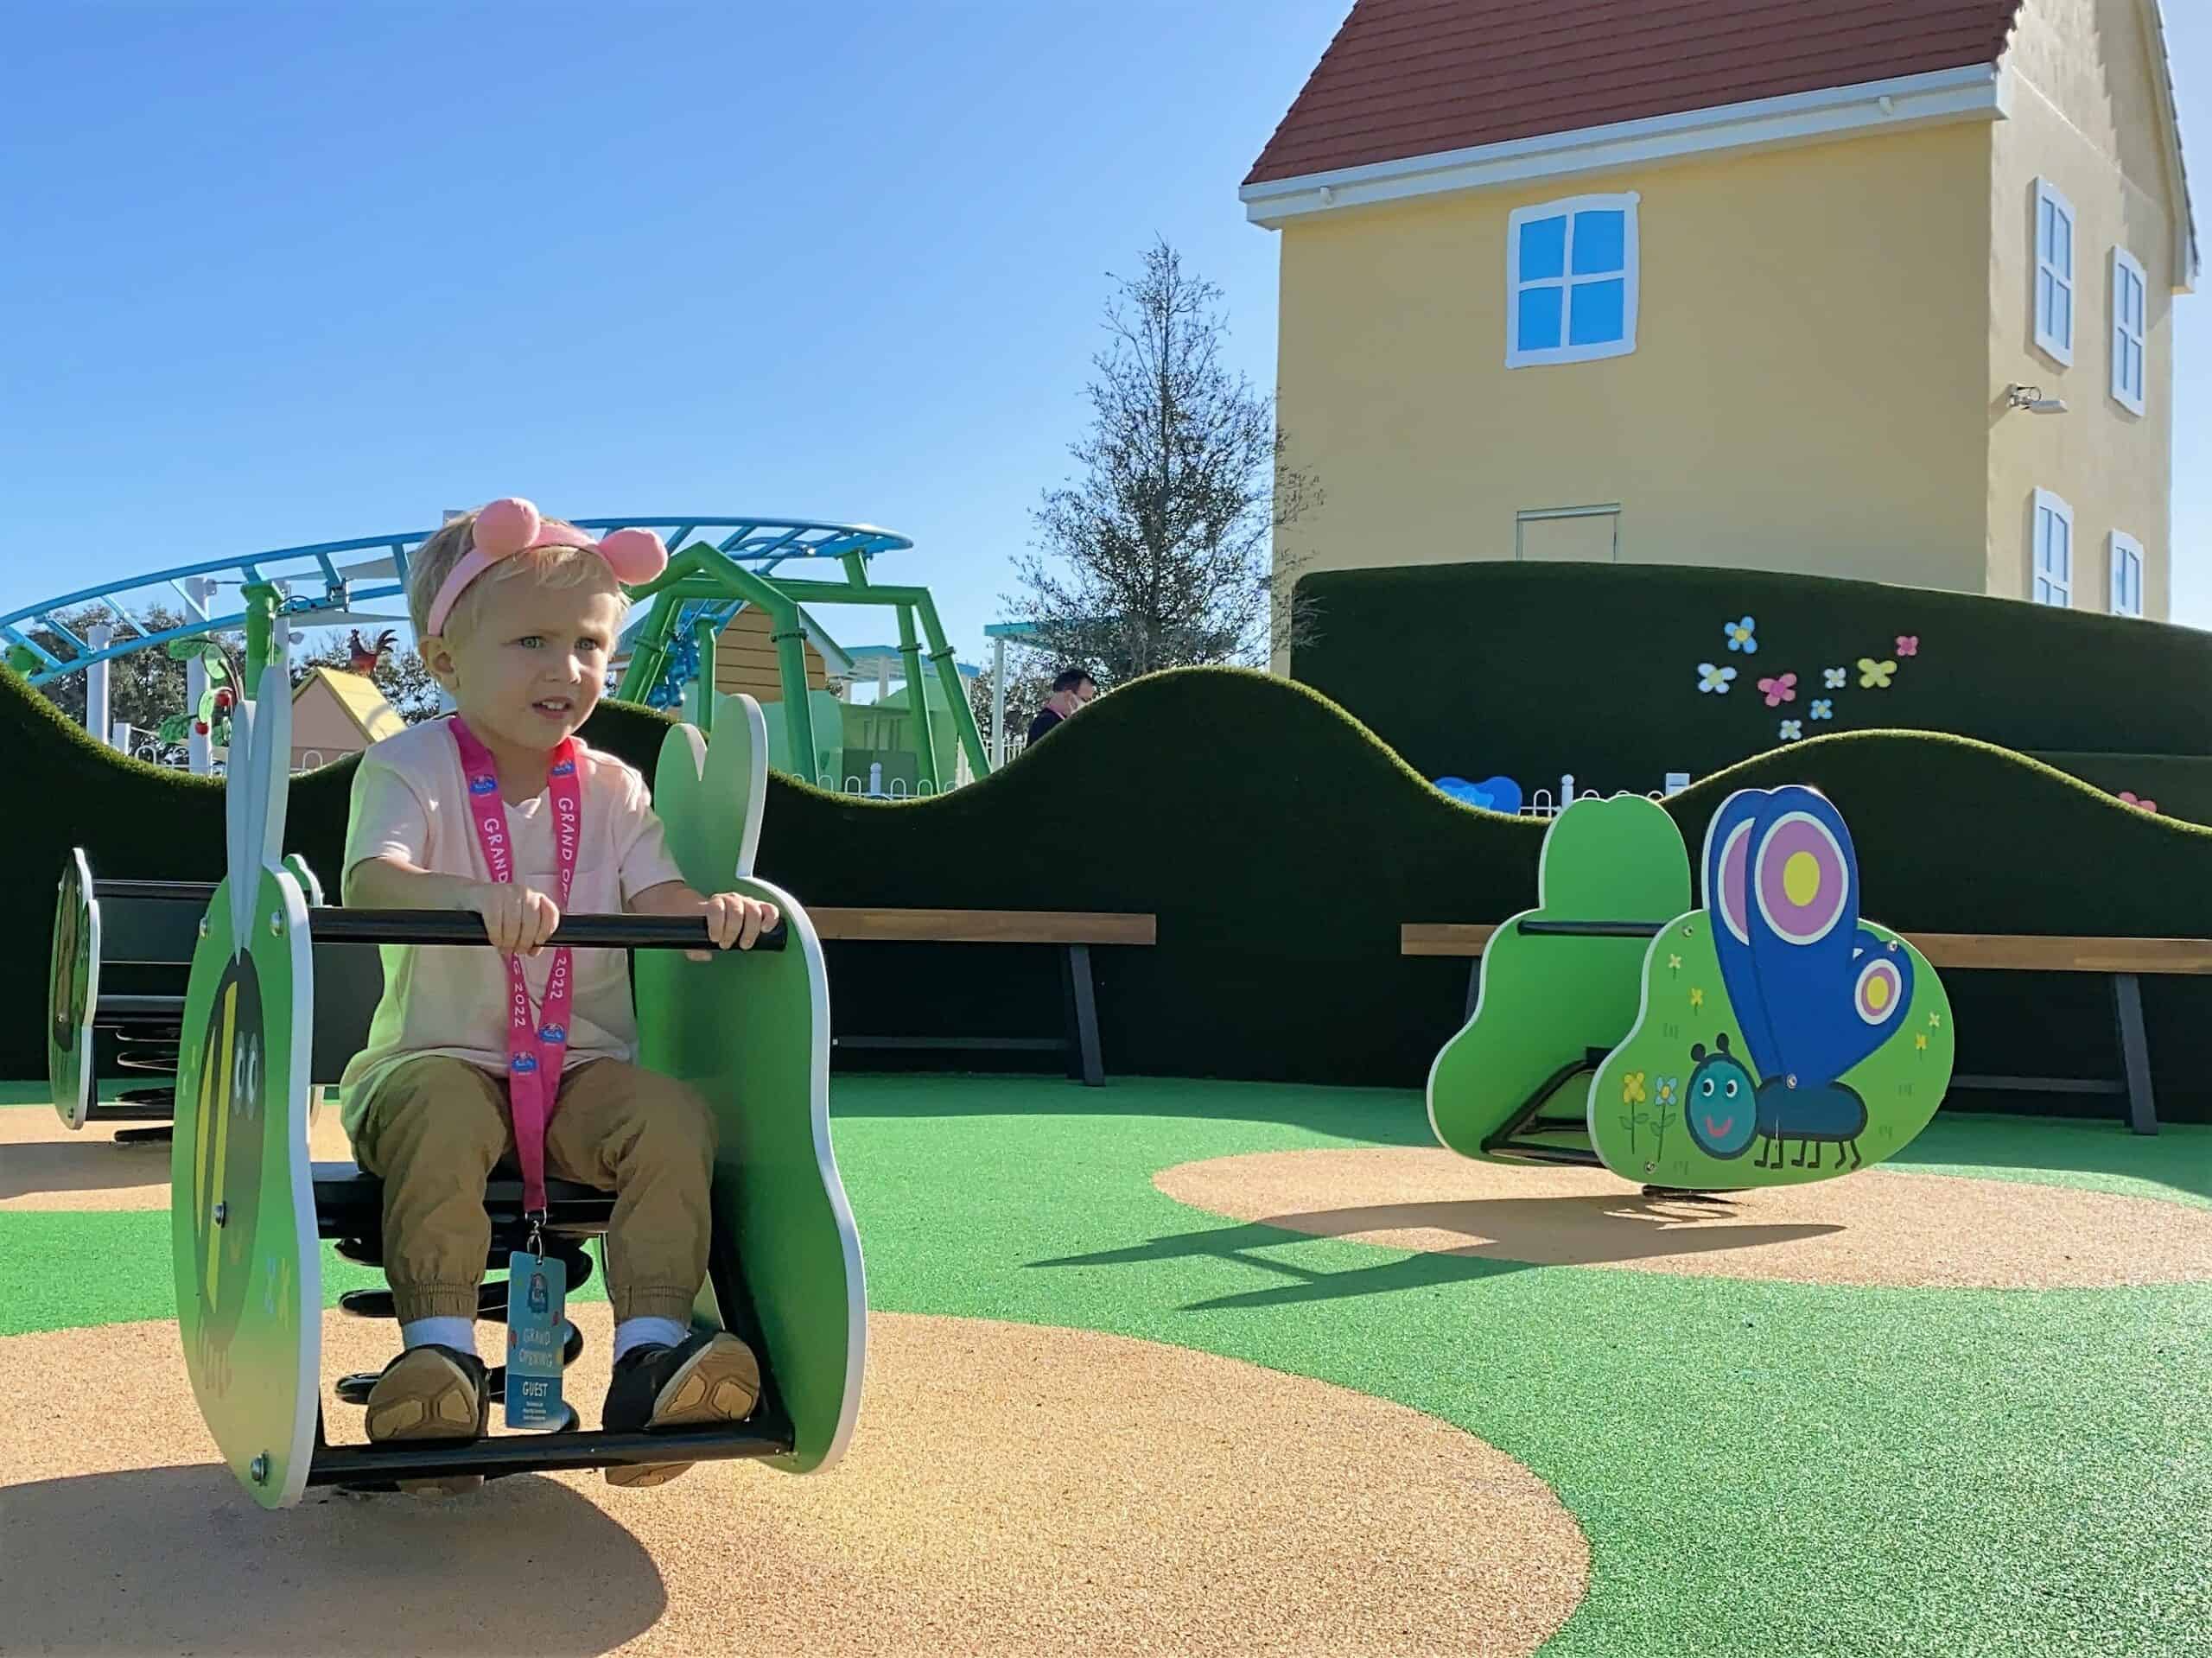 Granny Pig's Garden Play Area is a great spot for the smallest guests with a variety of playground equipment